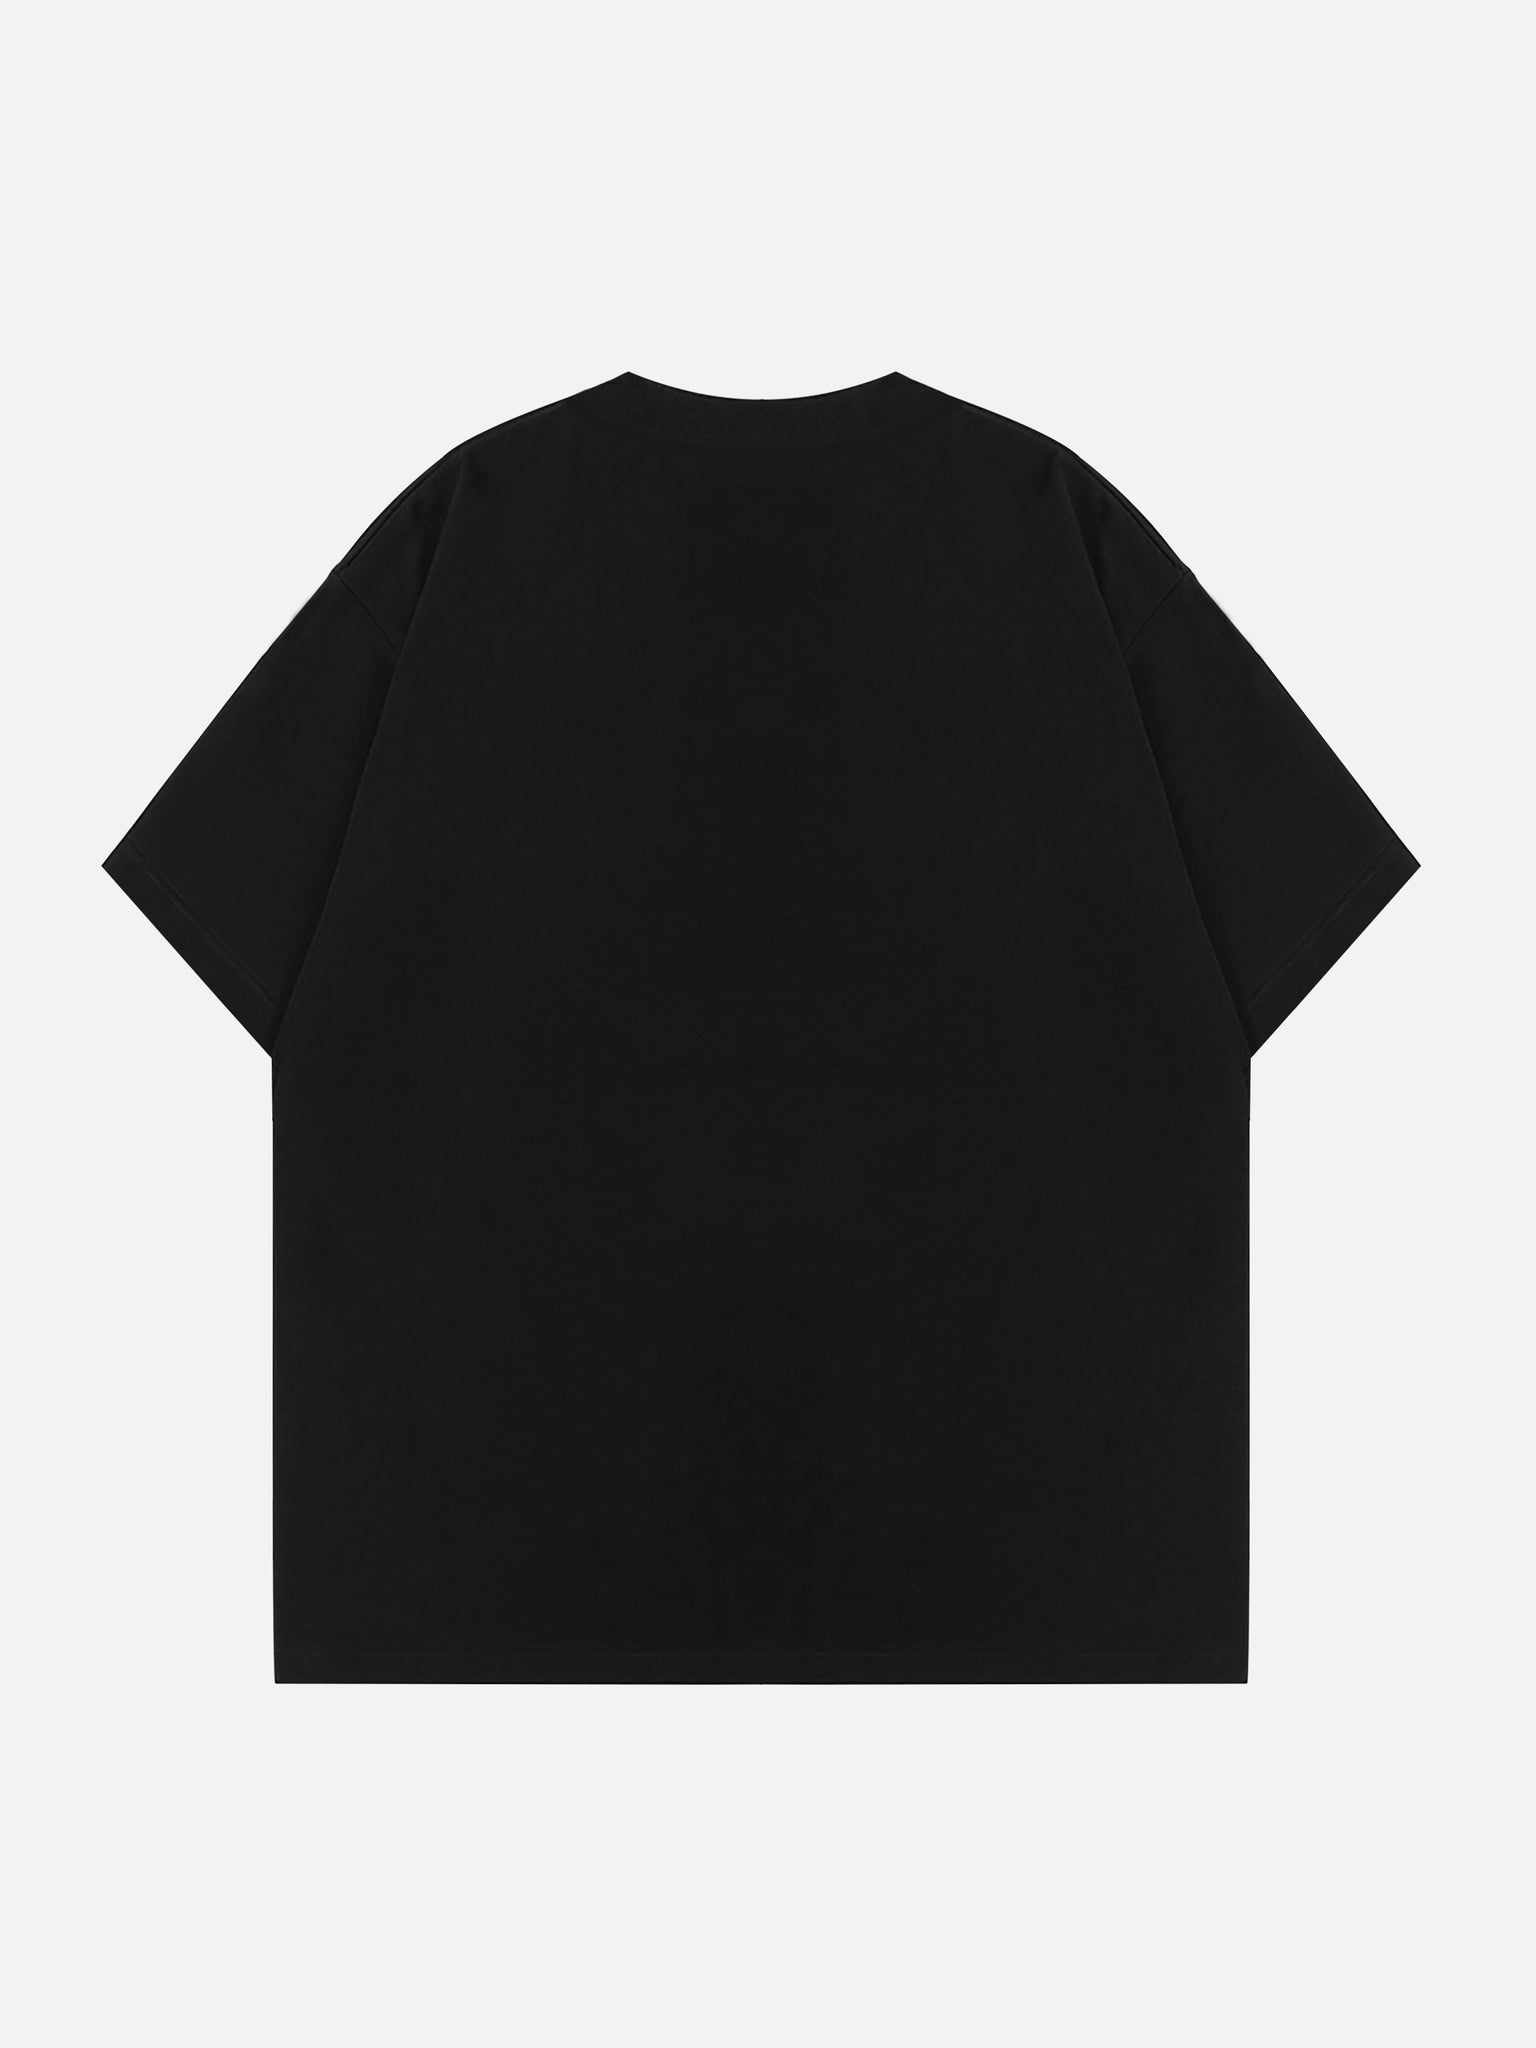 Thesupermade Oval Logo T-Shirt -1222